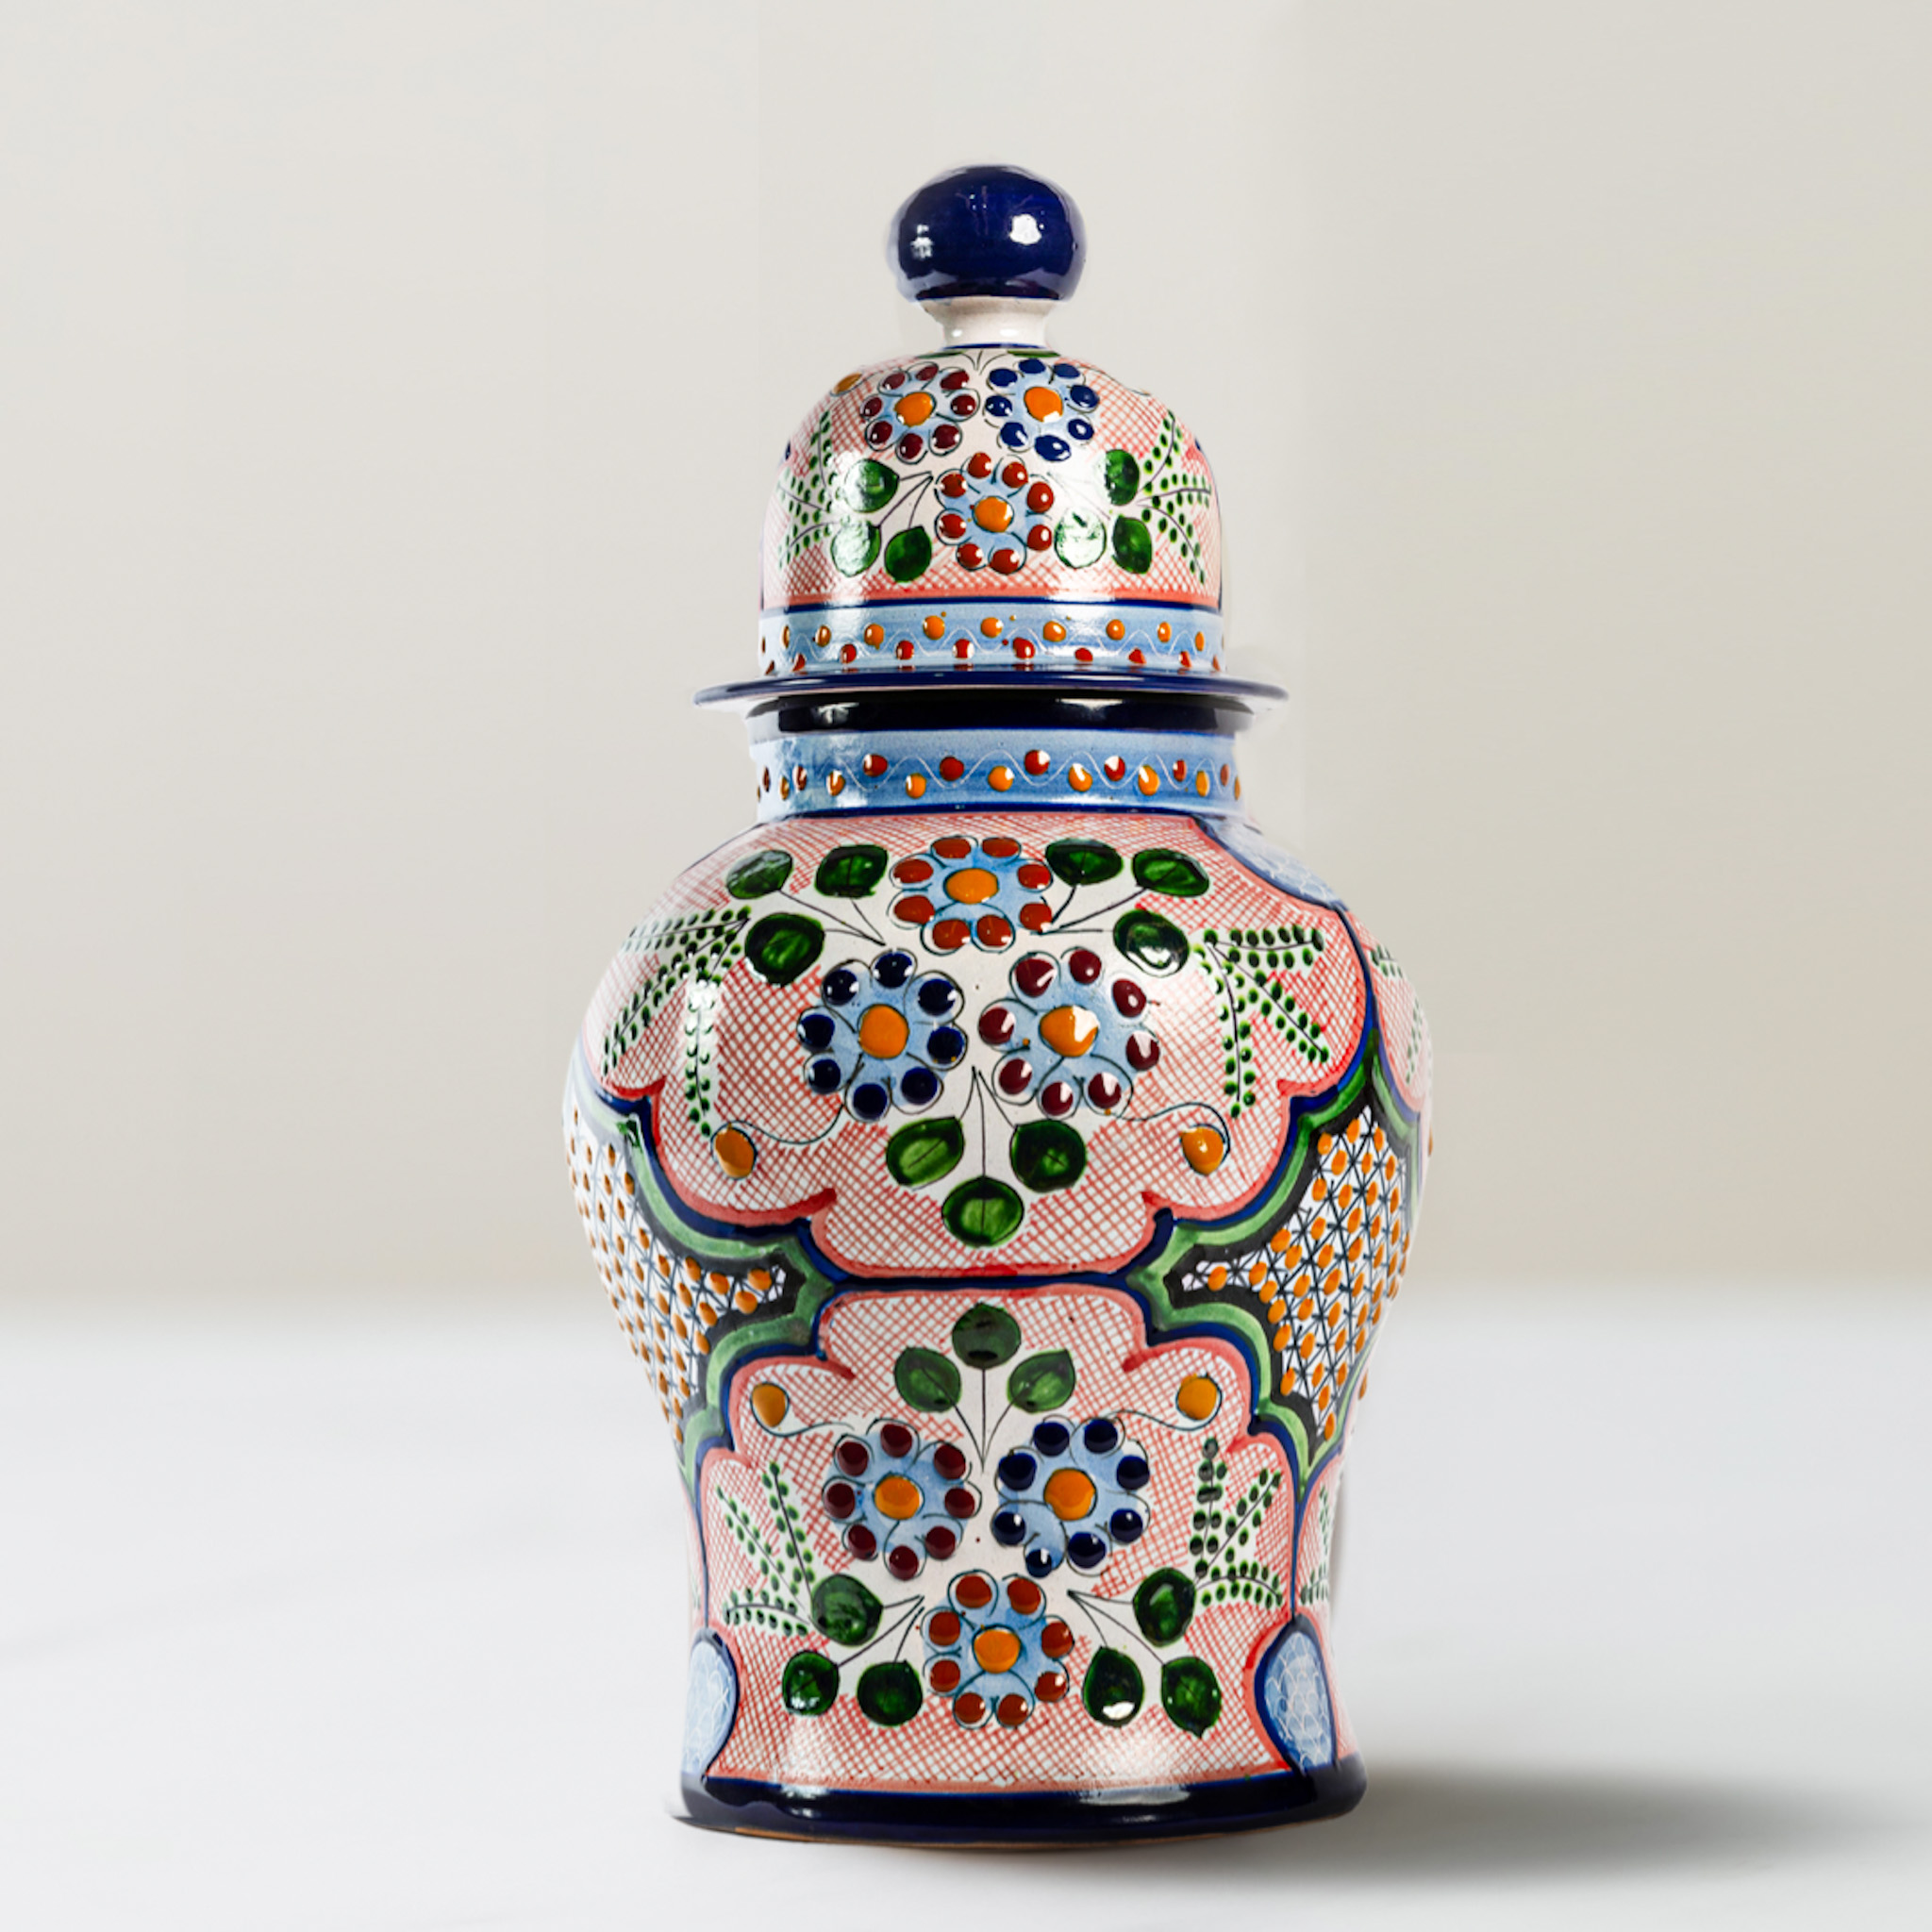 you know how to recognize the real talavera?